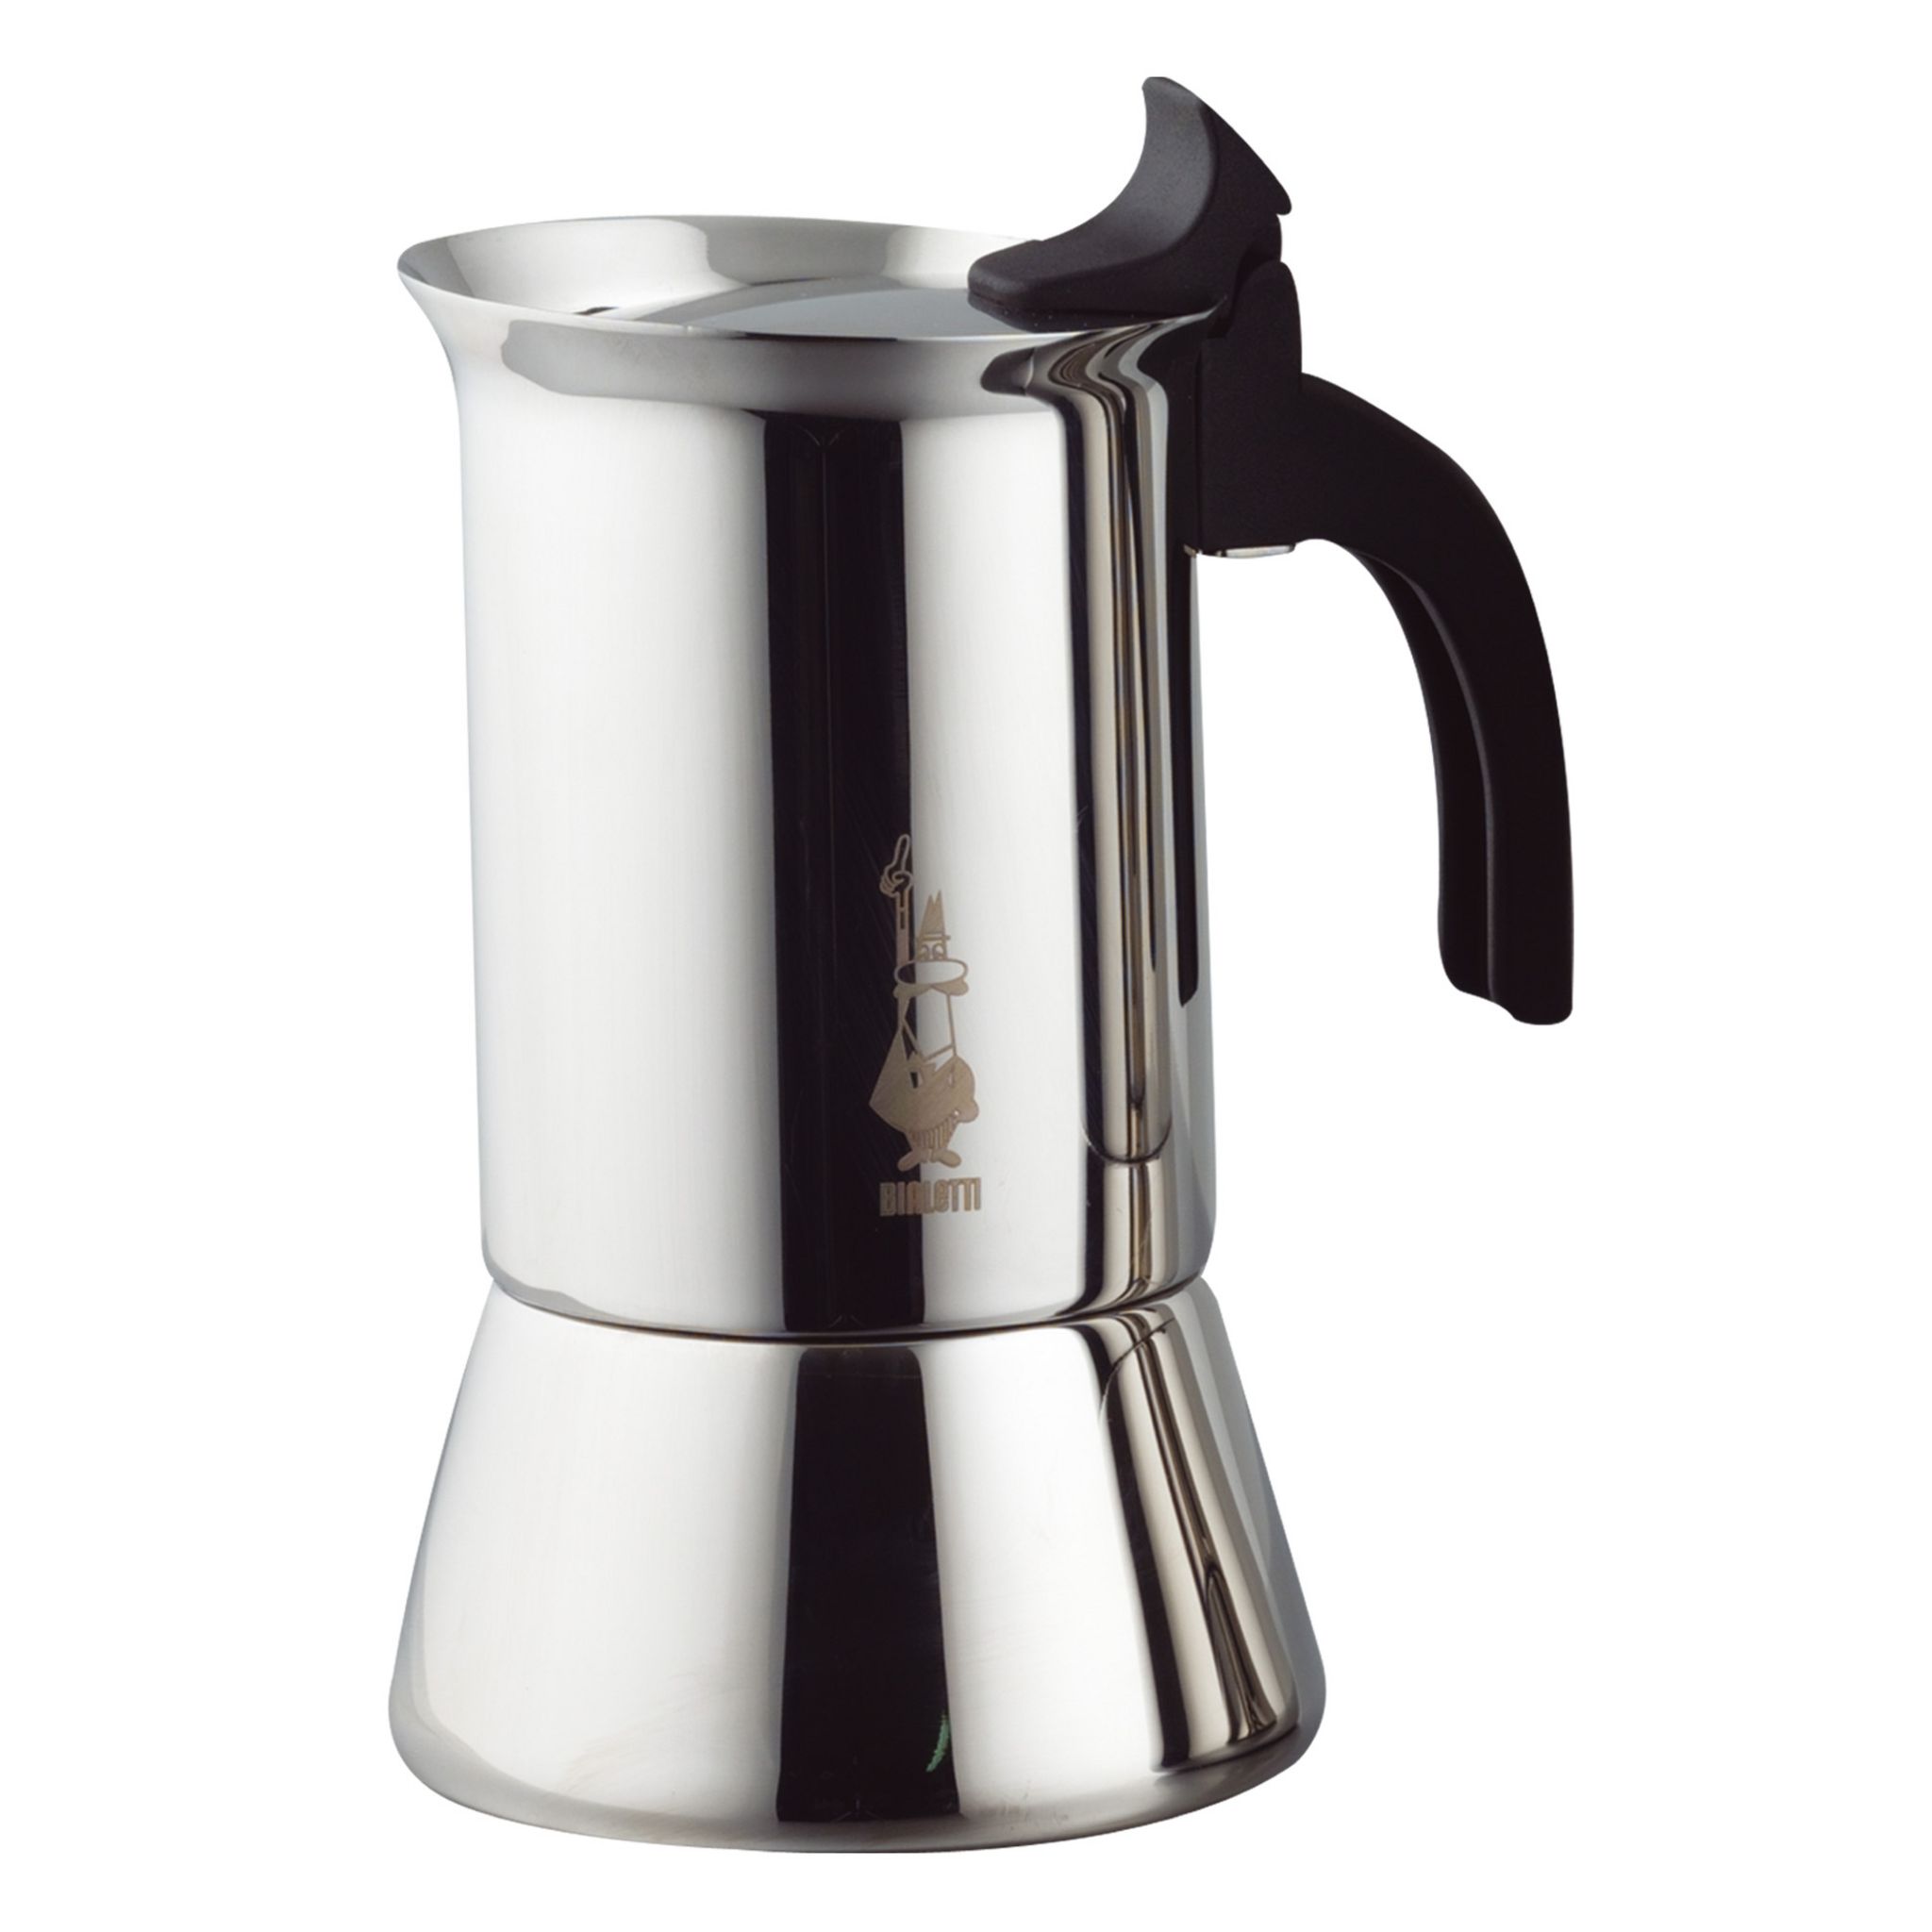 Cafetière Italienne Bialetti Induction 6 tasses